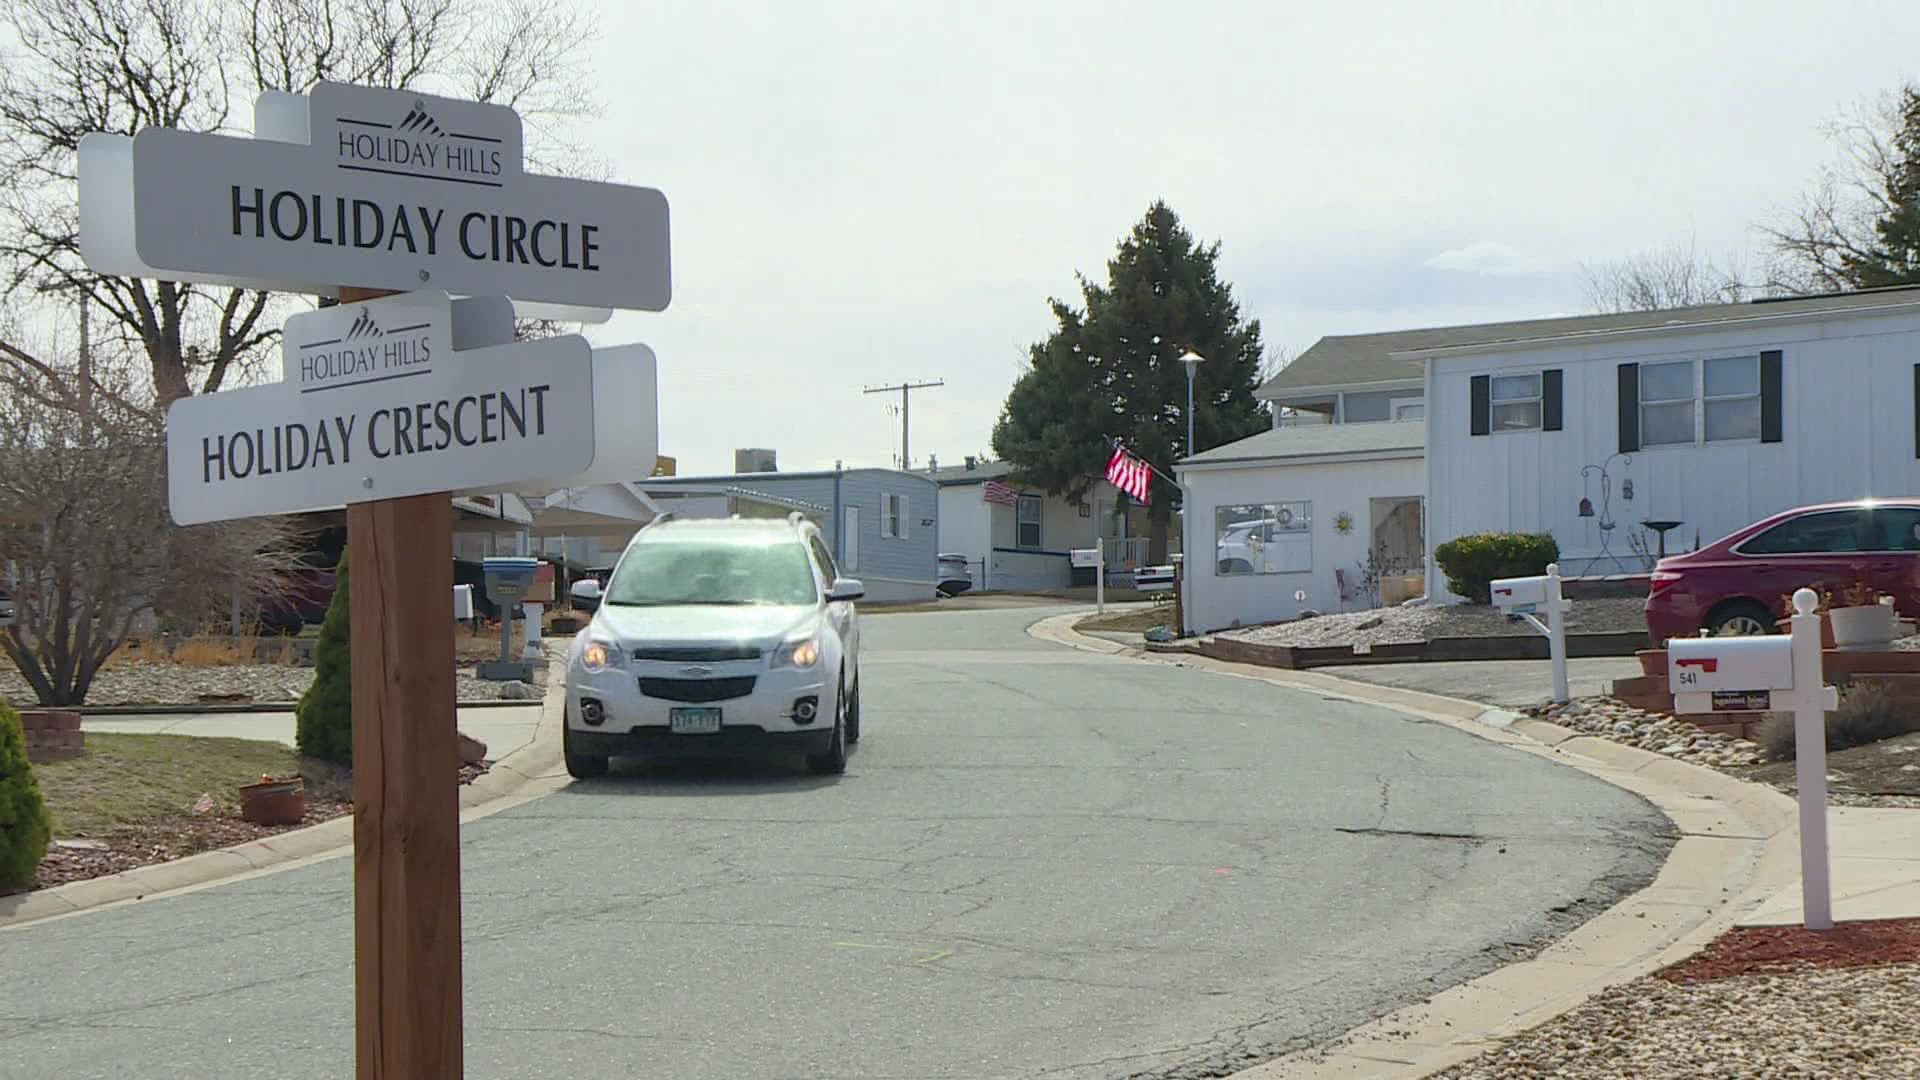 A bill would pass a rent cap on mobile home park owners on property so lot rates can't rise too high for residents.